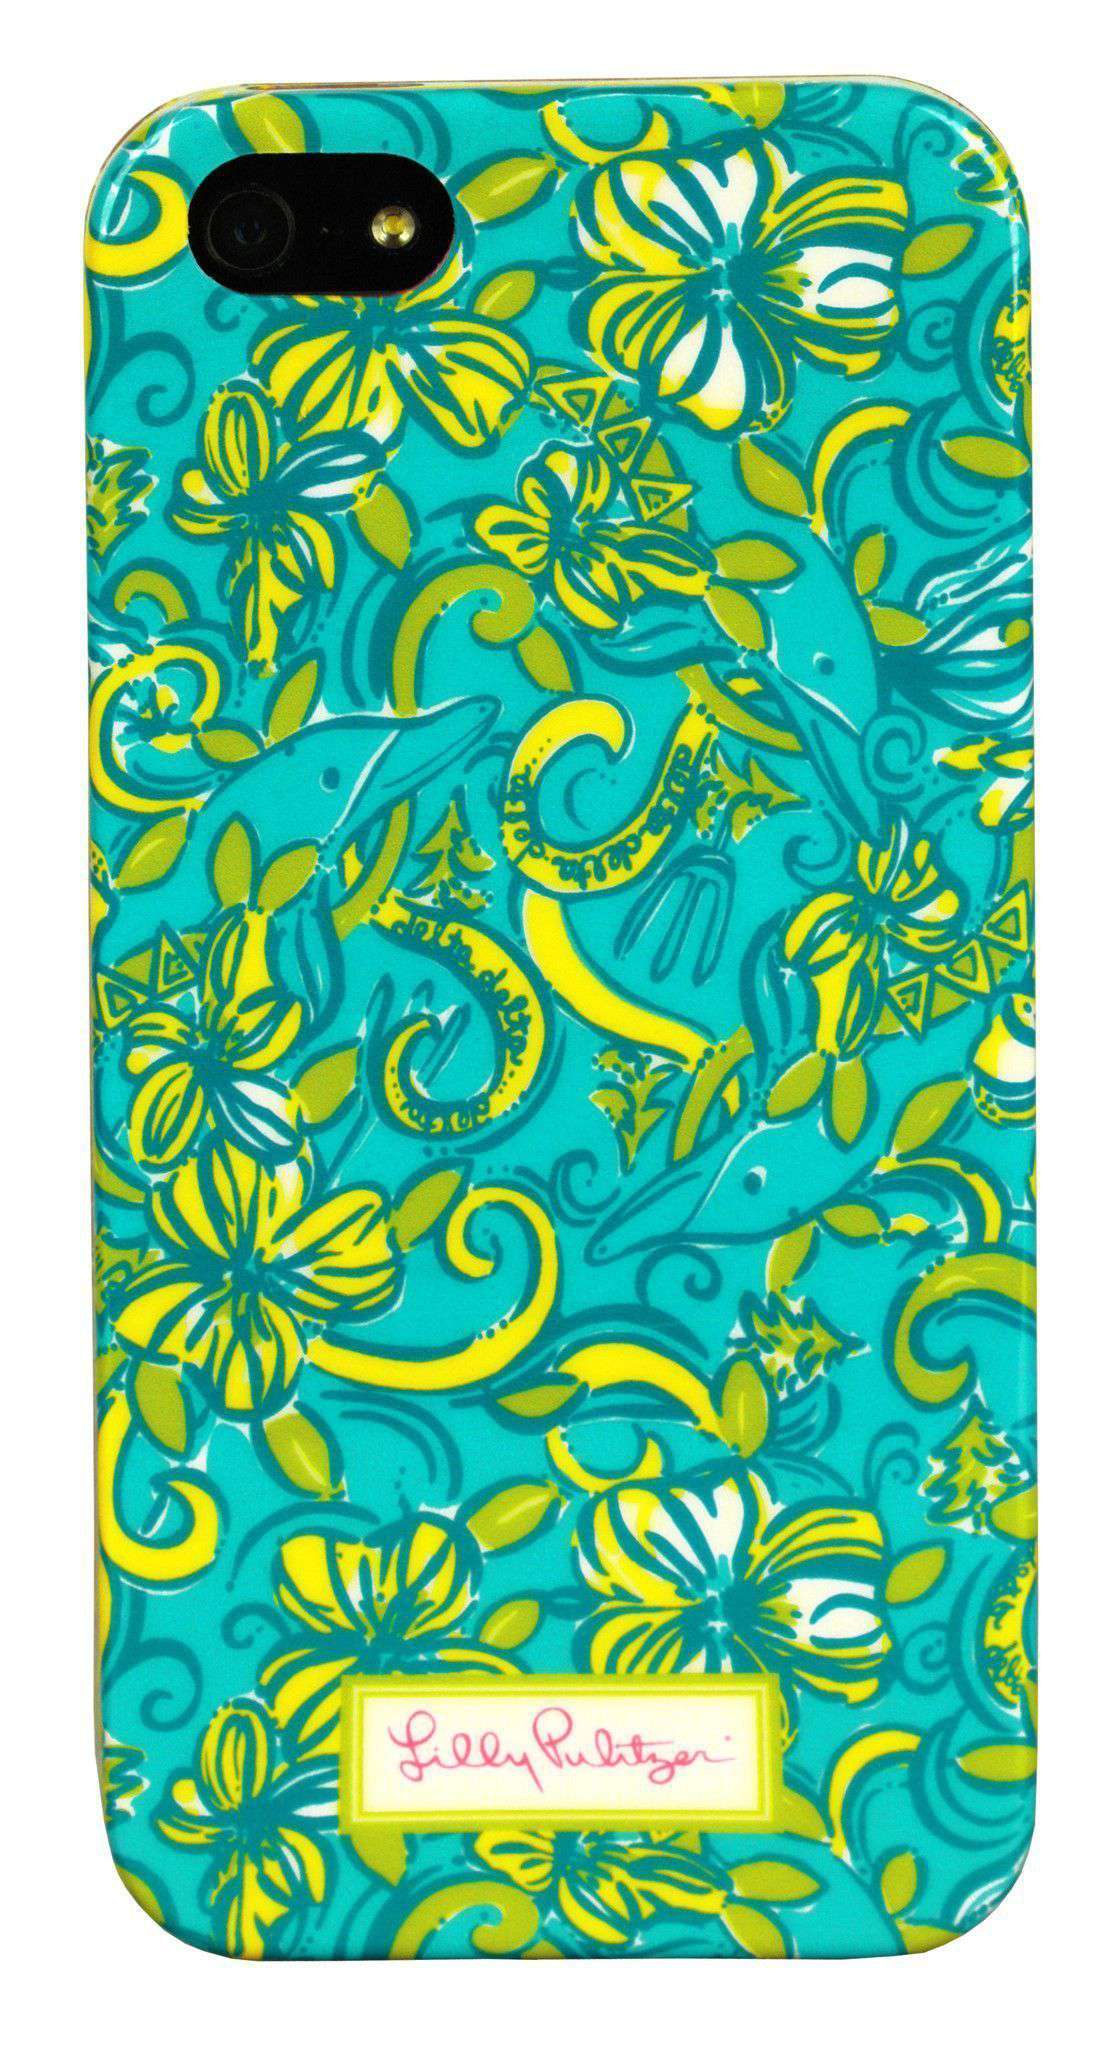 Delta Delta Delta iPhone 5/5s Cover by Lilly Pulitzer - Country Club Prep